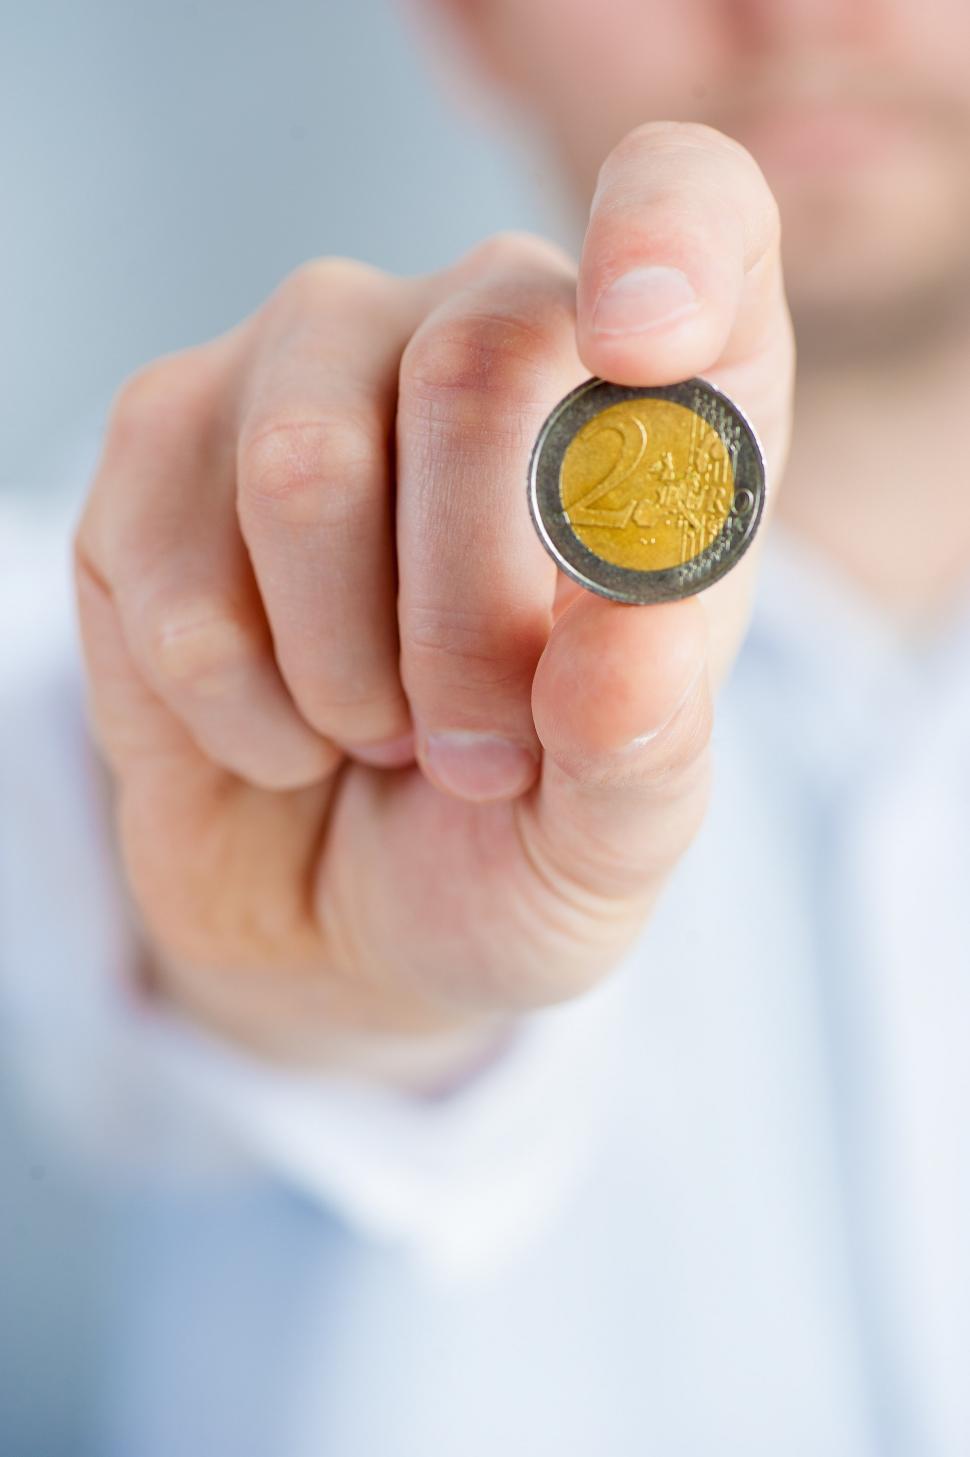 Free Image of Man Holding Coin in Right Hand 